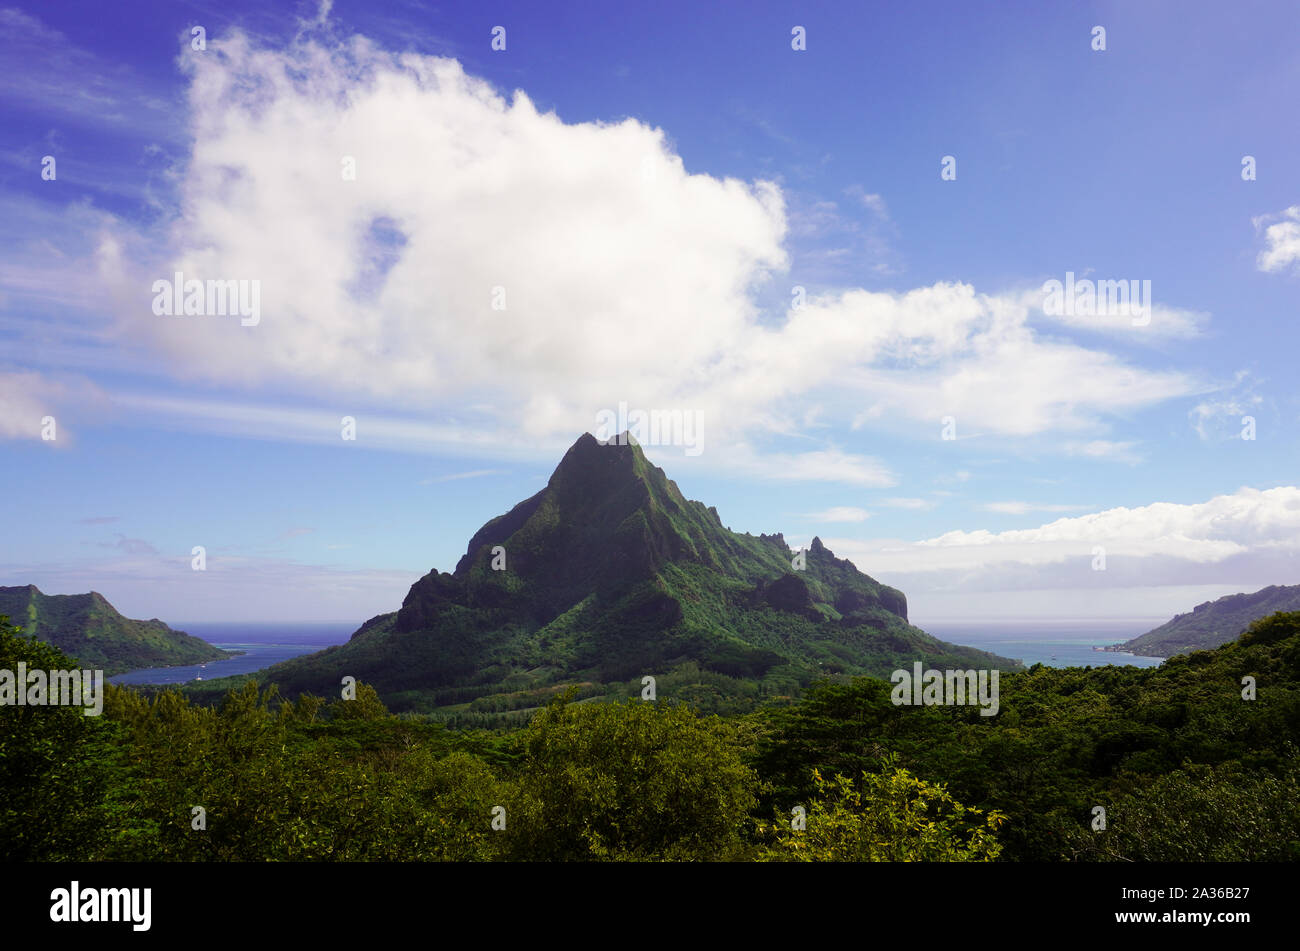 View of green Rotui mountain from Belvedere lookout on the island of Moorea in French Polynesia; copy space Stock Photo